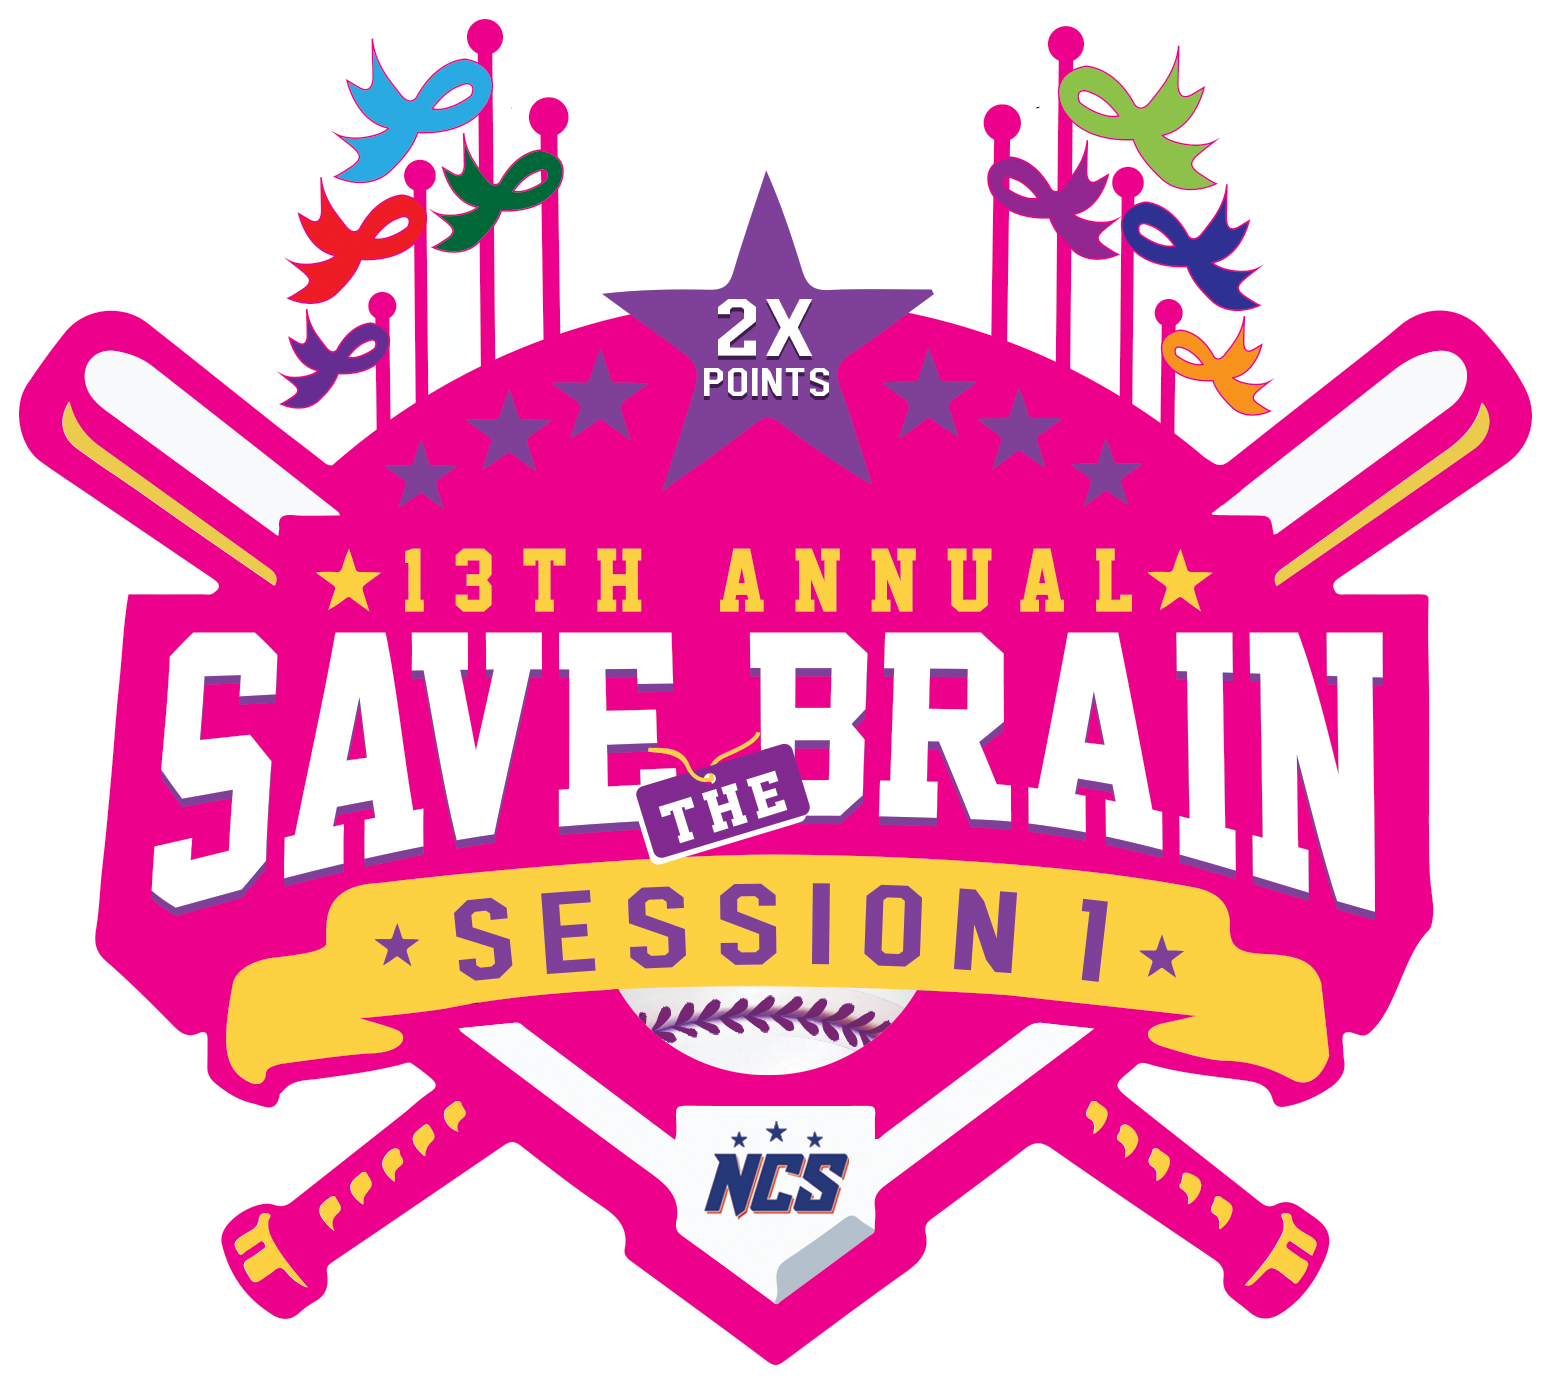 15TH ANNUAL SAVE THE BRAIN "**TEAM BELTS AND PINK RINGS*** WILL SELL OUT Logo